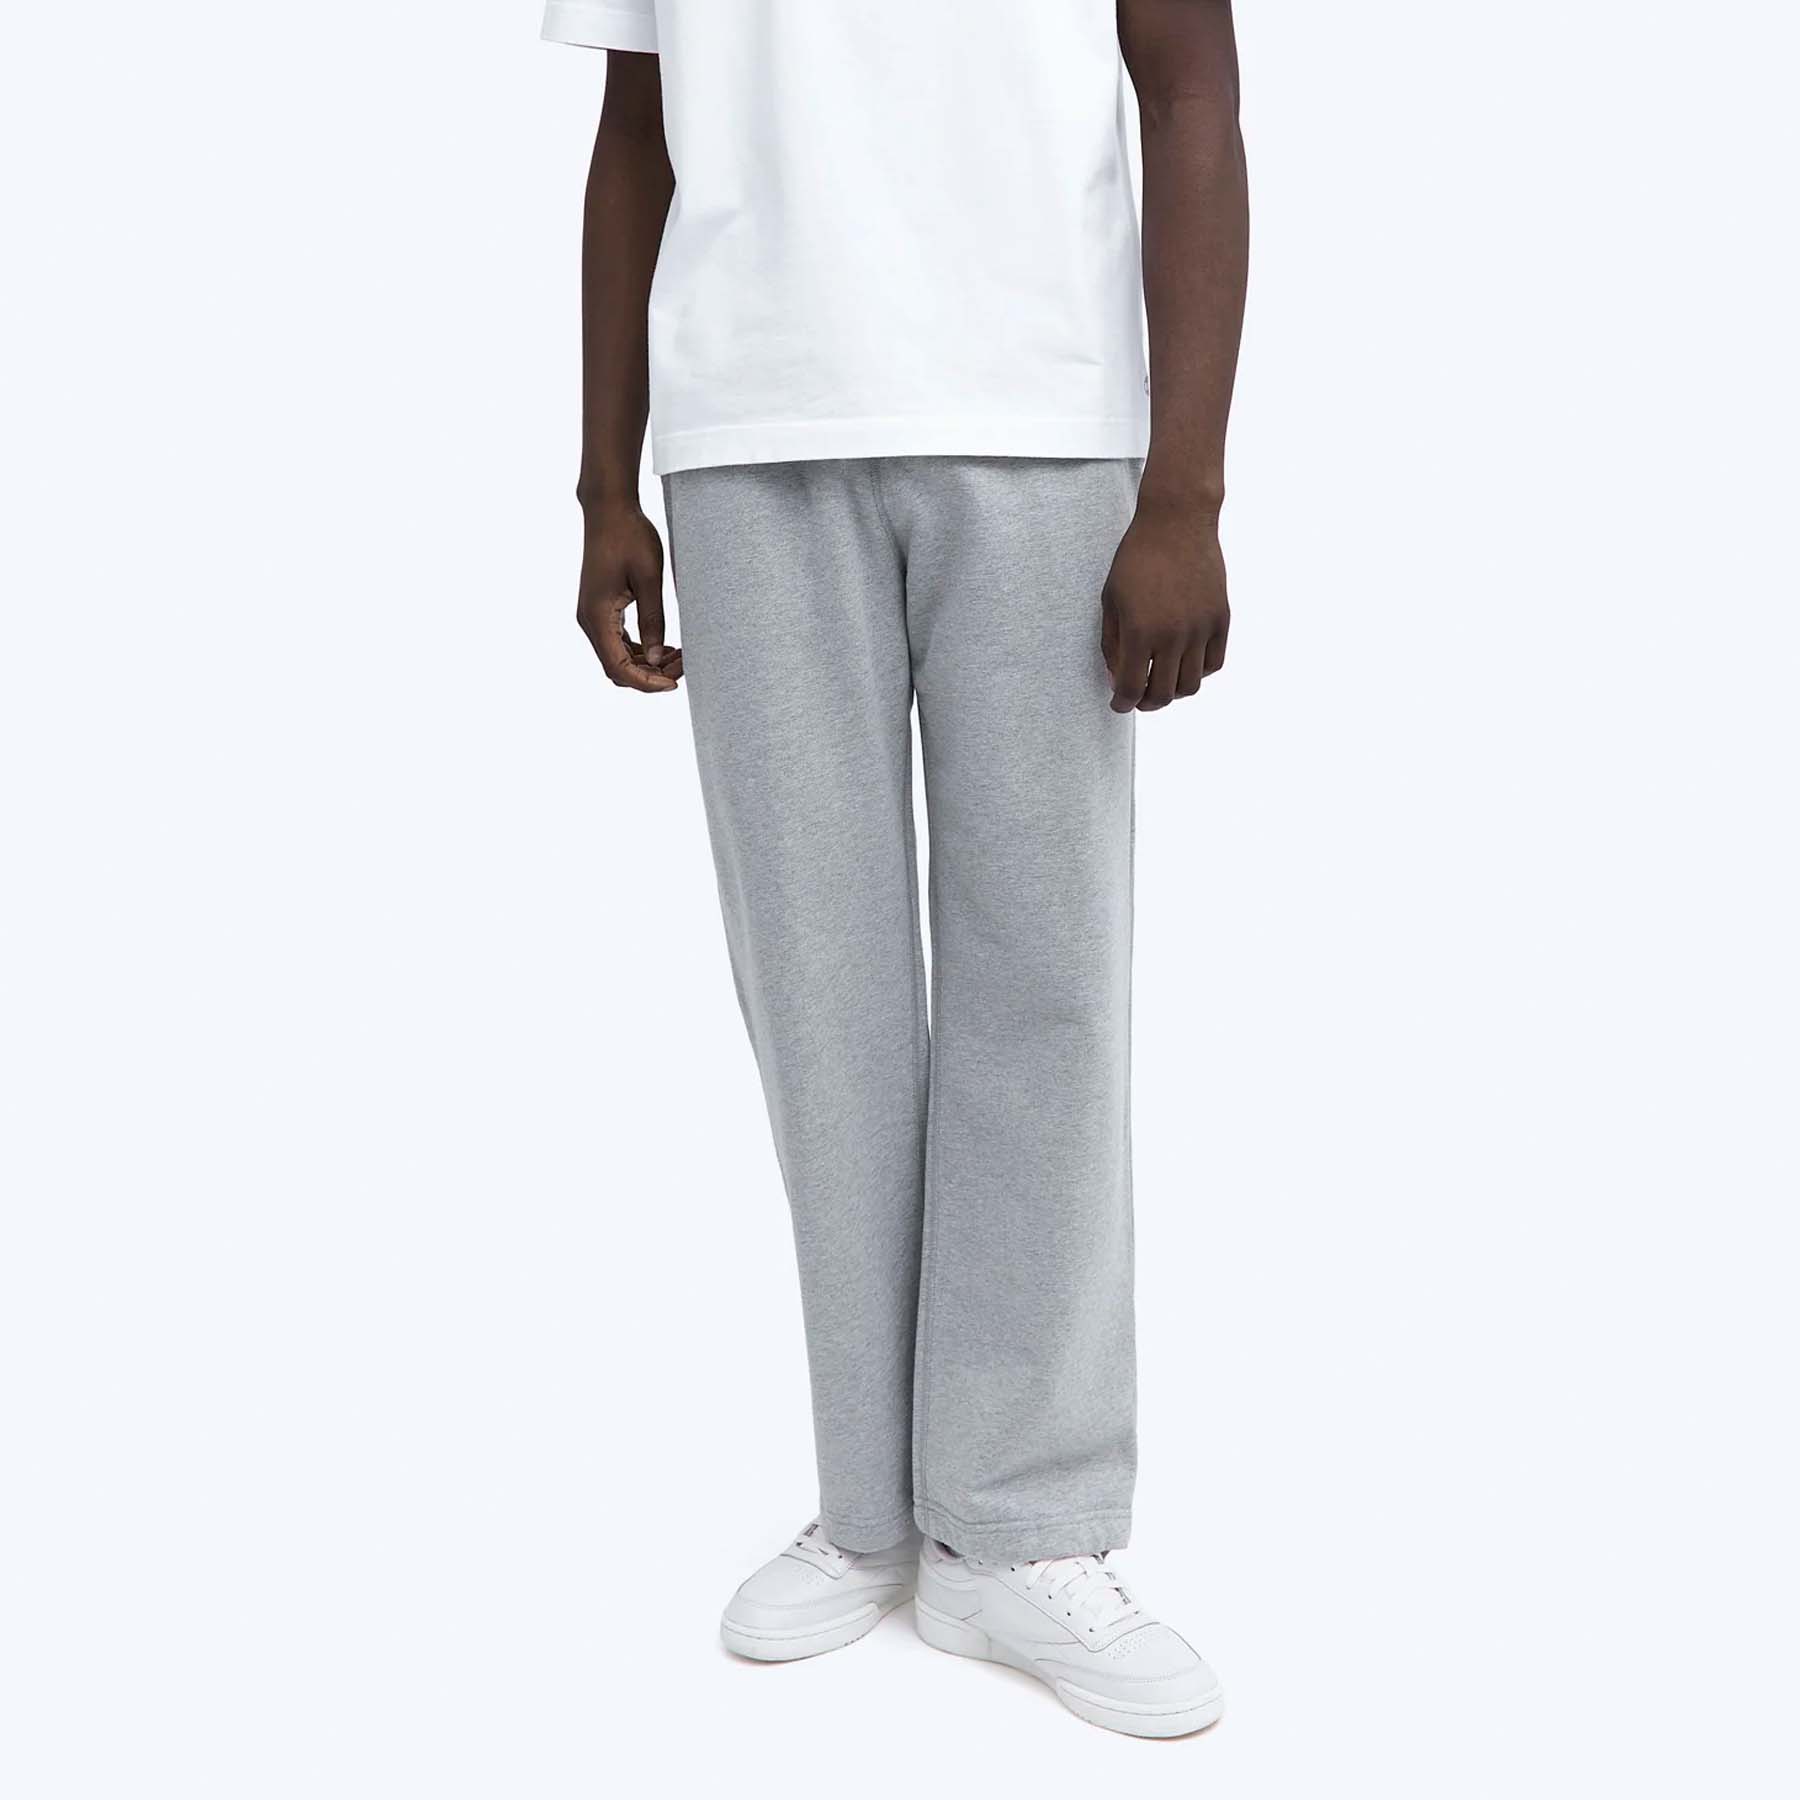 The Best Men's Sweatpants, From Basic to Baller